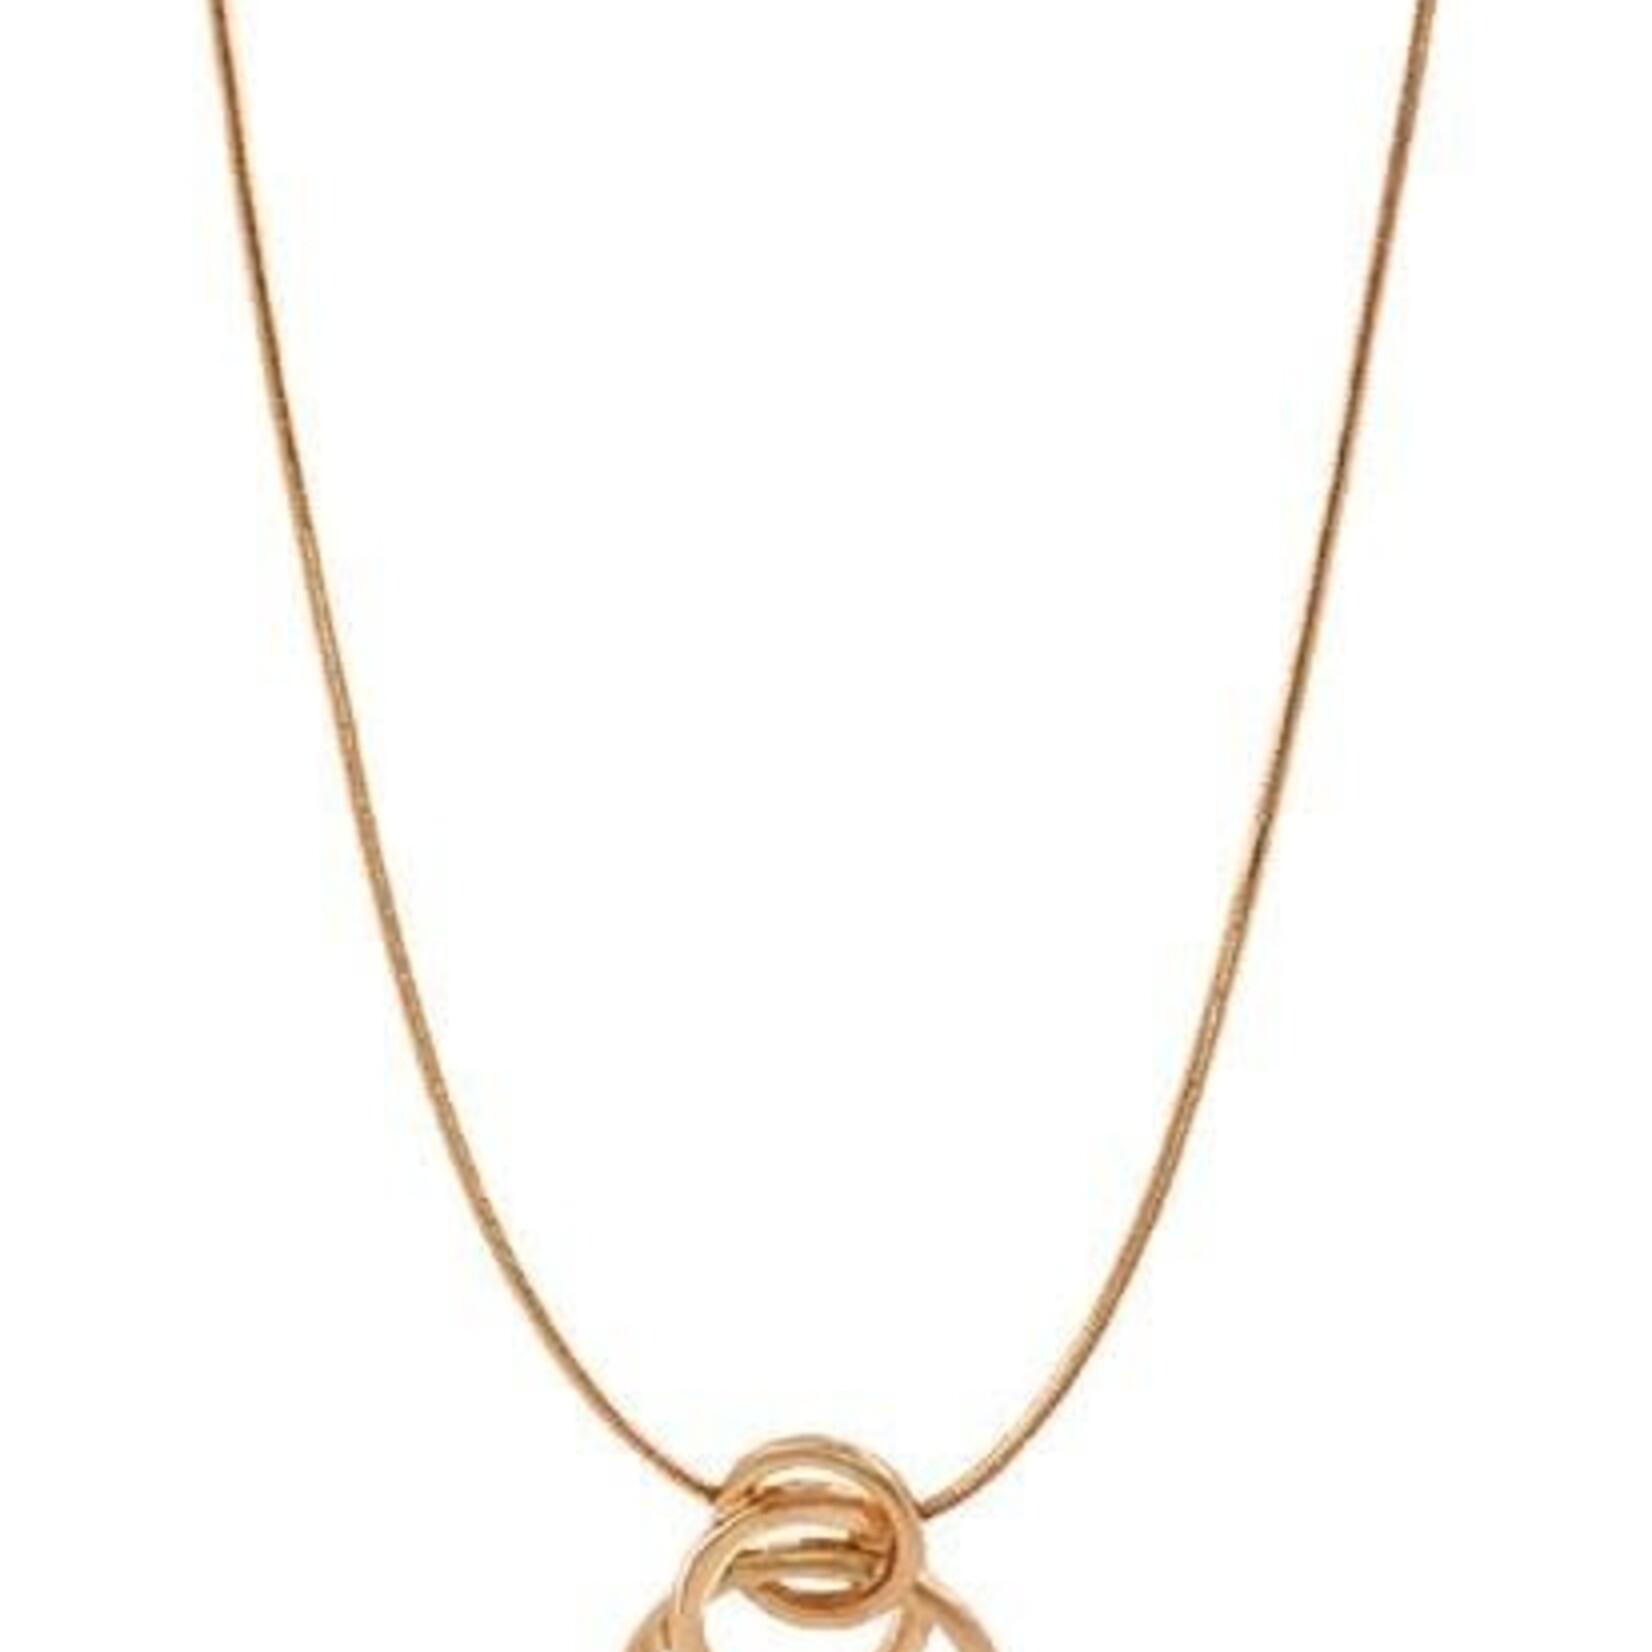 Short Rosegold necklace with swirl pendant